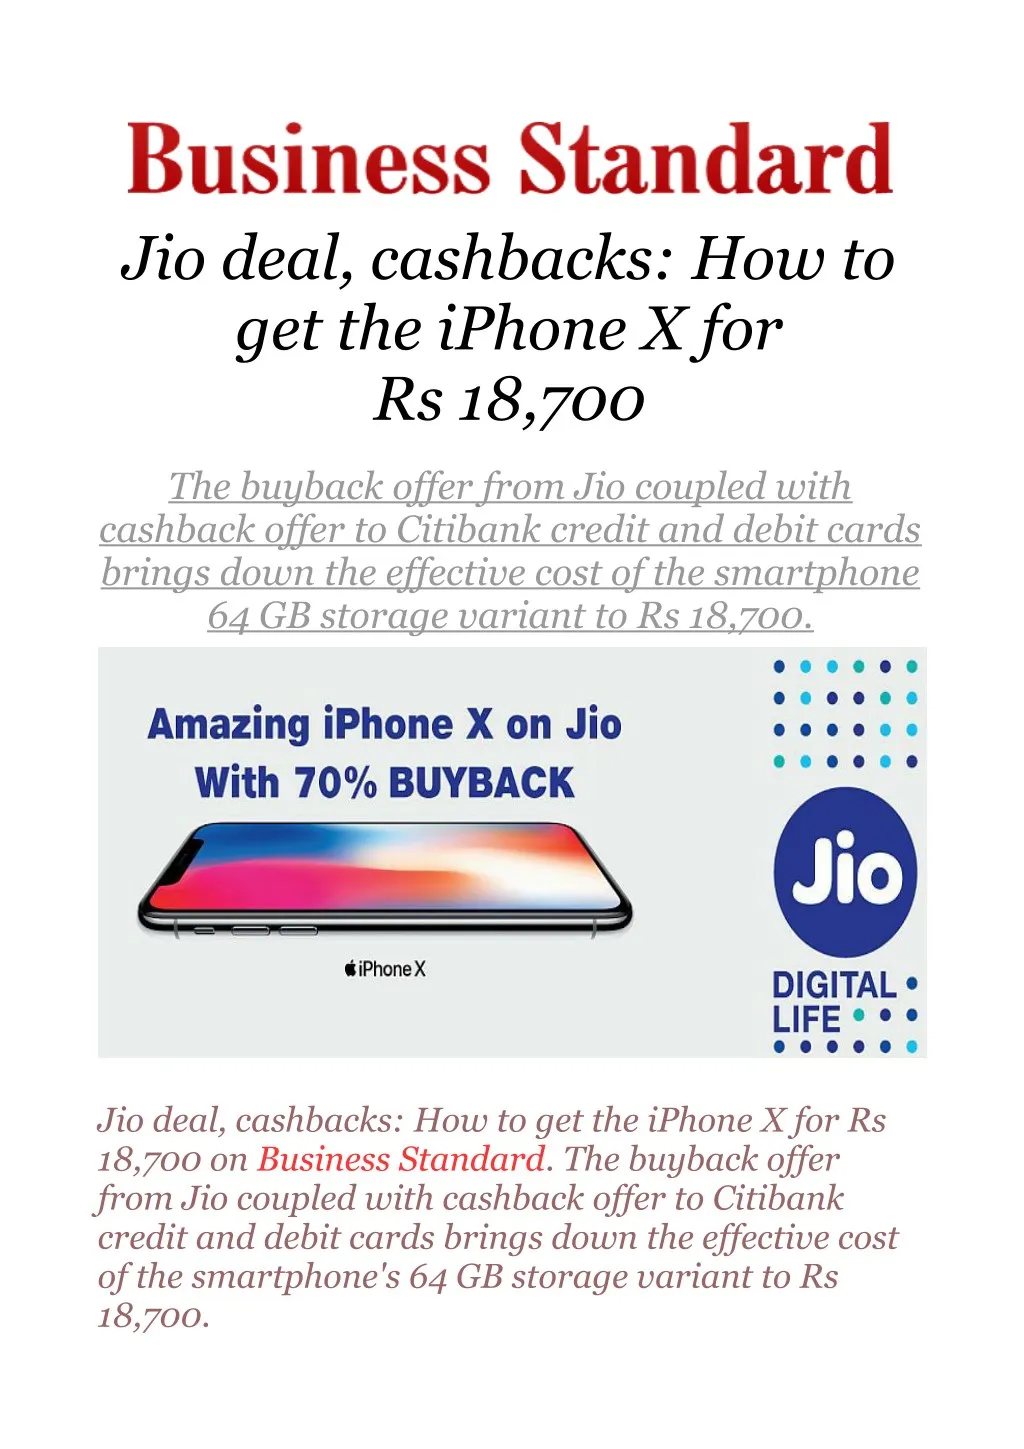 jio deal cashbacks how to get the iphone